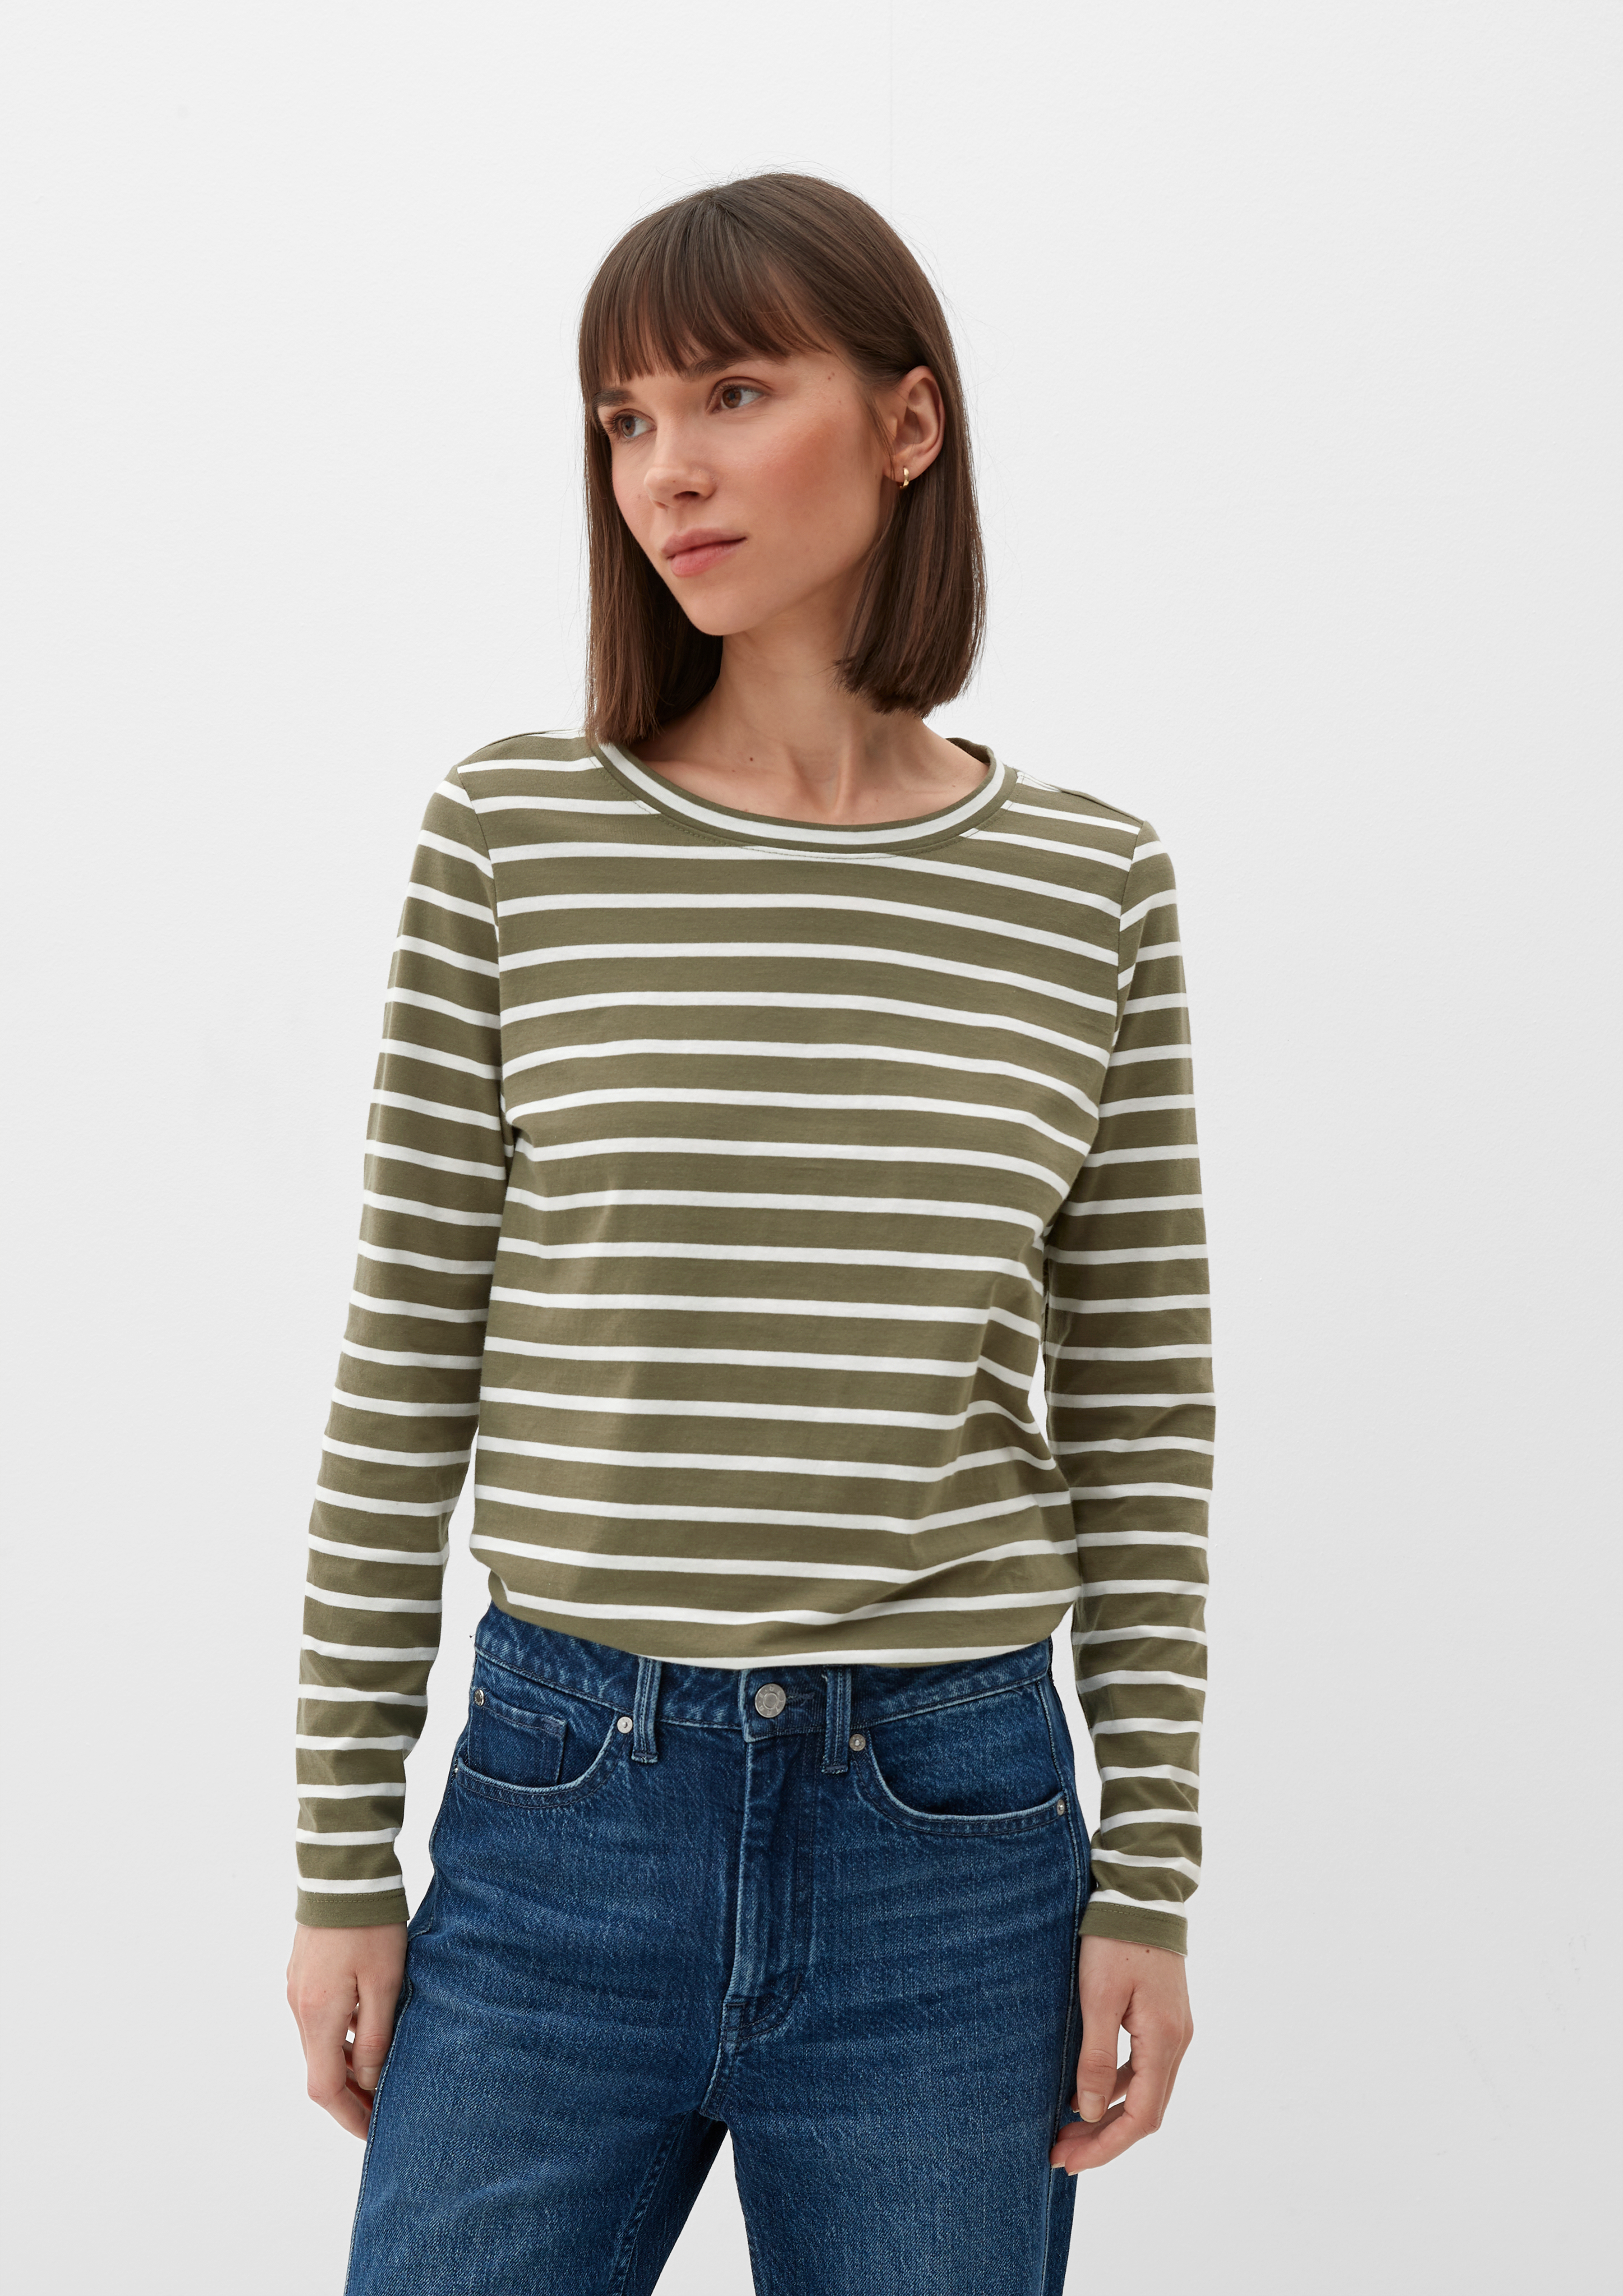 long Striped sleeve - navy jersey top